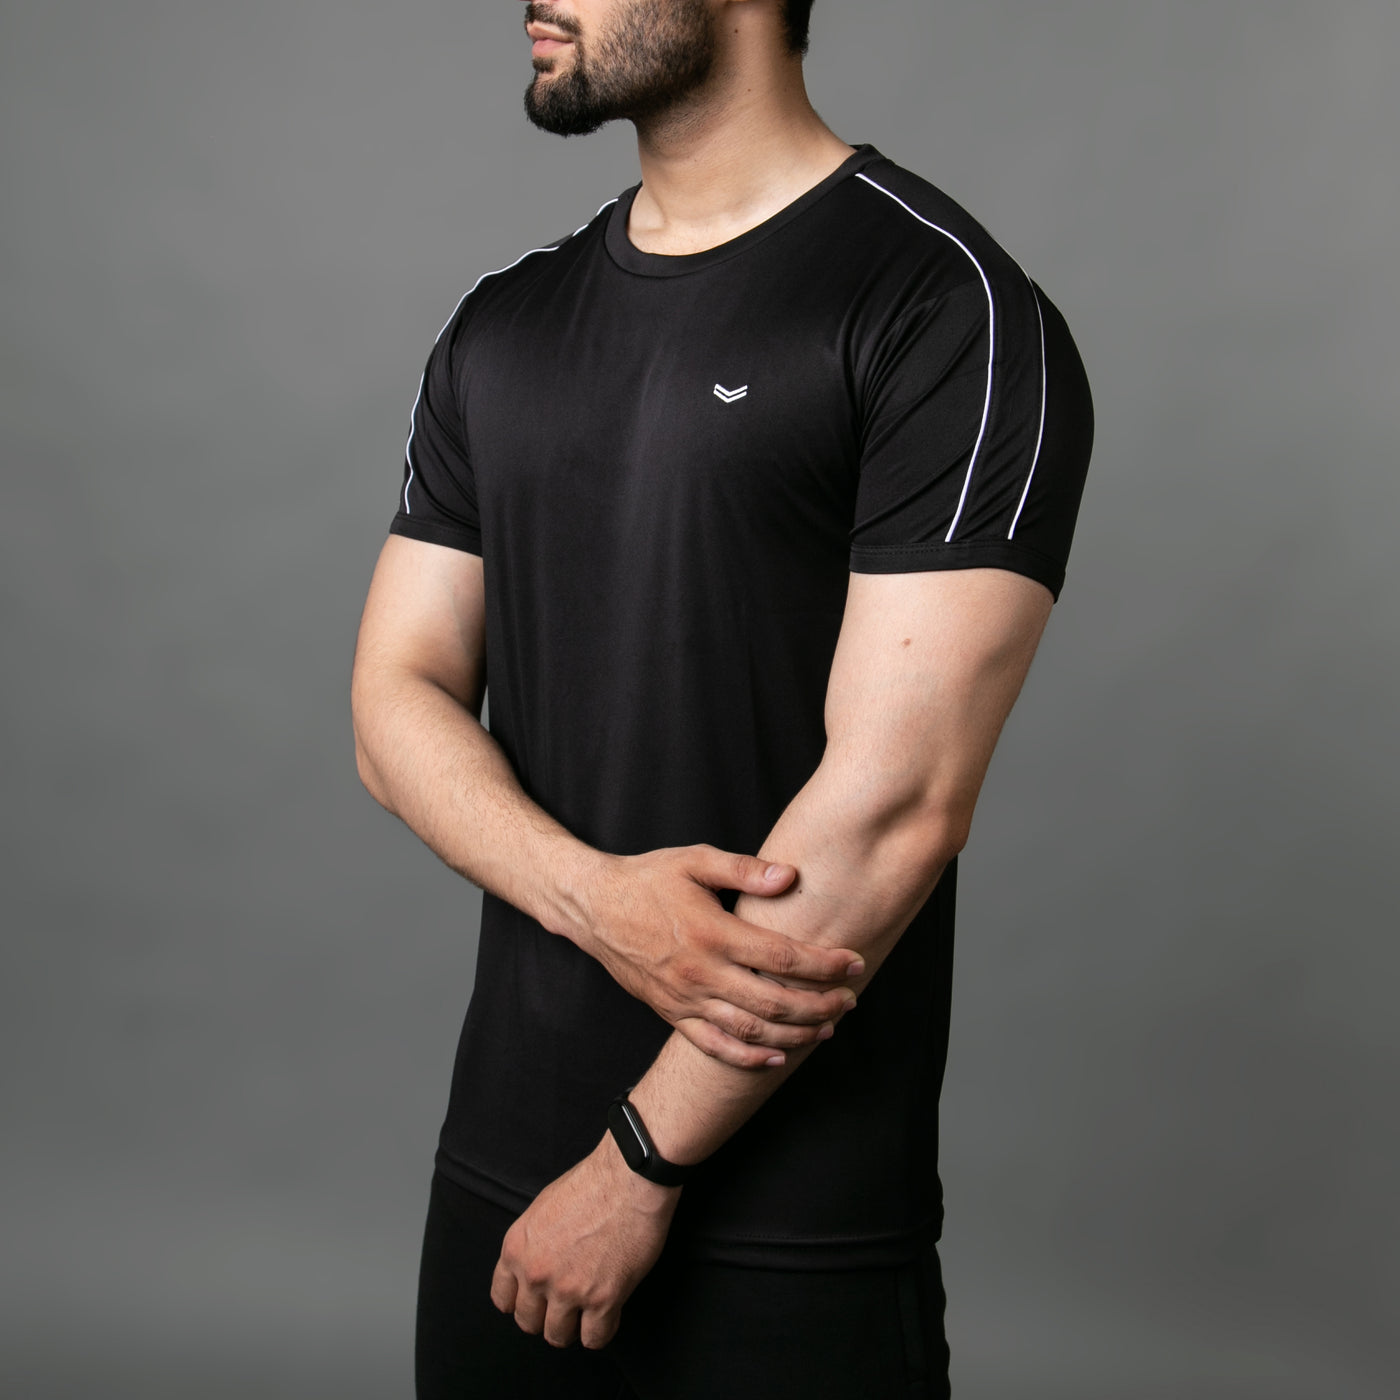 Premium Black Quick Dry Tee with Dual Piping